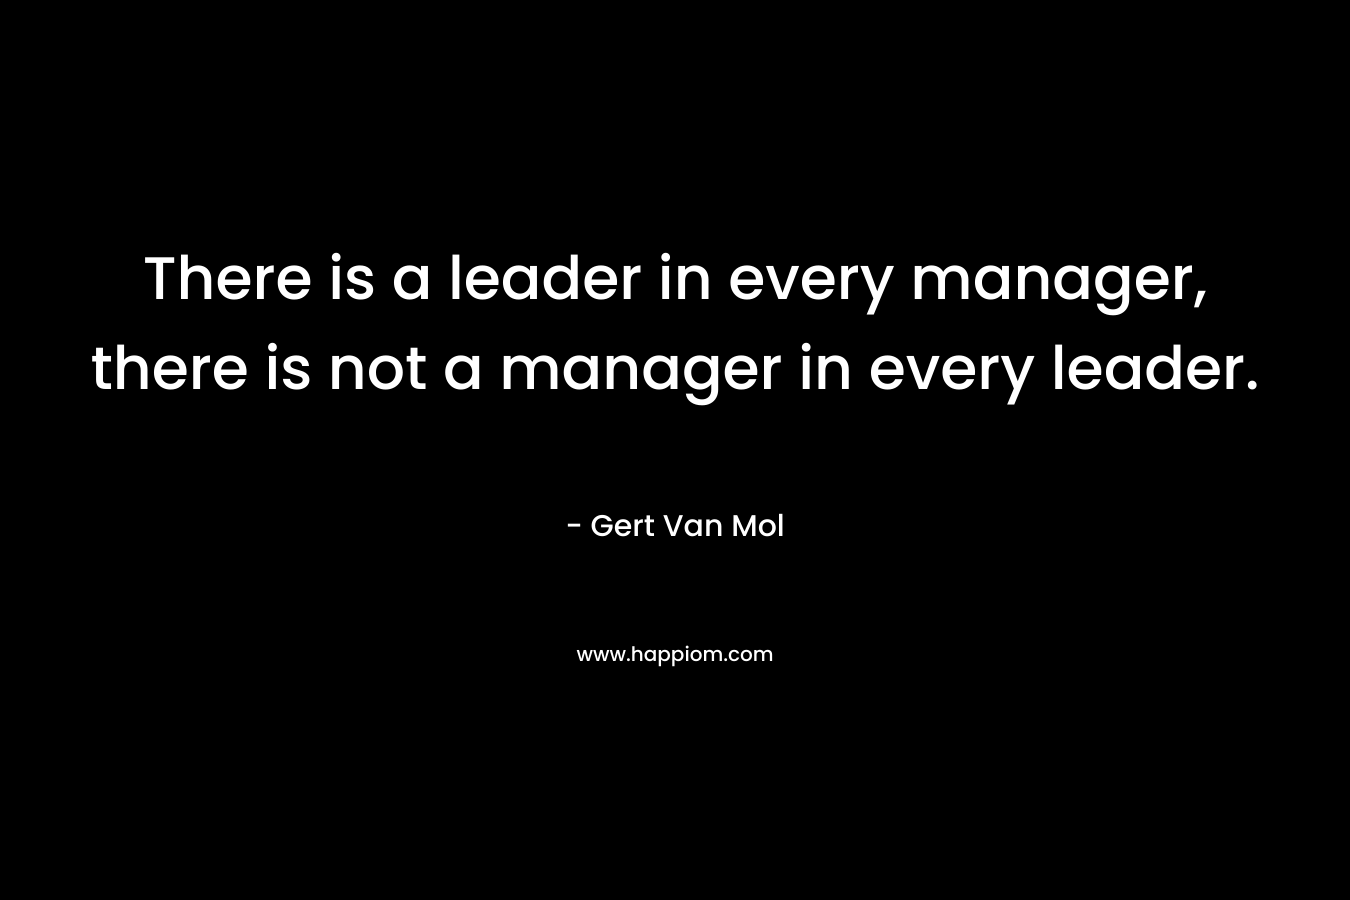 There is a leader in every manager, there is not a manager in every leader.